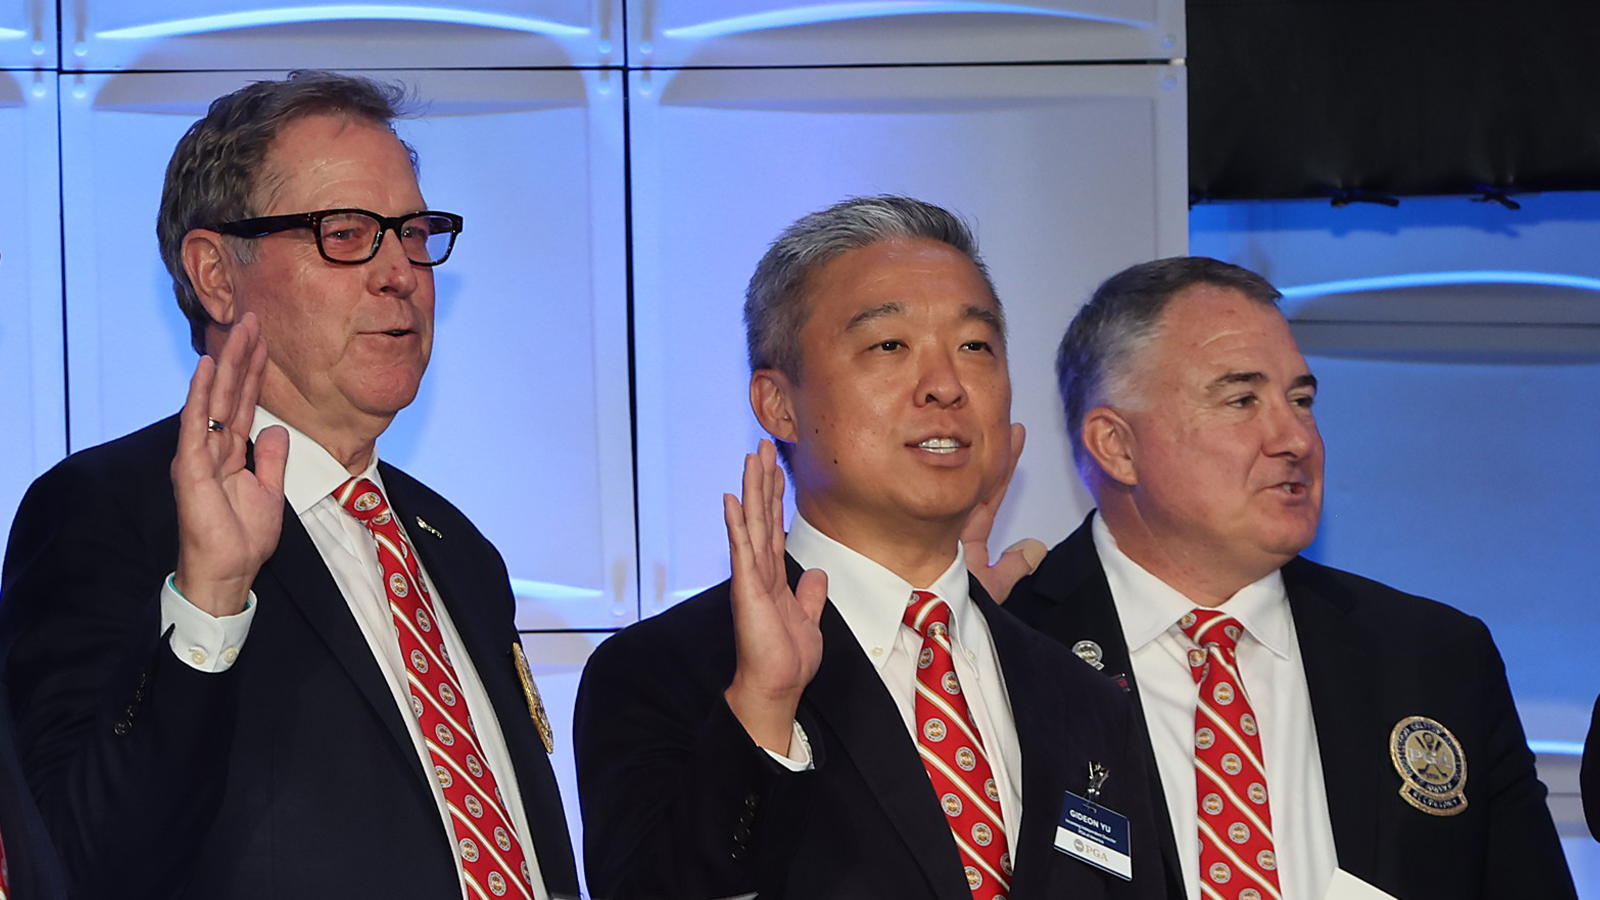 Gideon Yu and the other new board members are sworn in by PGA Honorary President Suzy Whaley during the 106th PGA Annual Meeting at JW Marriott Phoenix Desert Ridge Resort & Spa on Thursday, November 3, 2022 in Phoenix, Arizona. (Photo by Sam Greenwood/PGA of America)